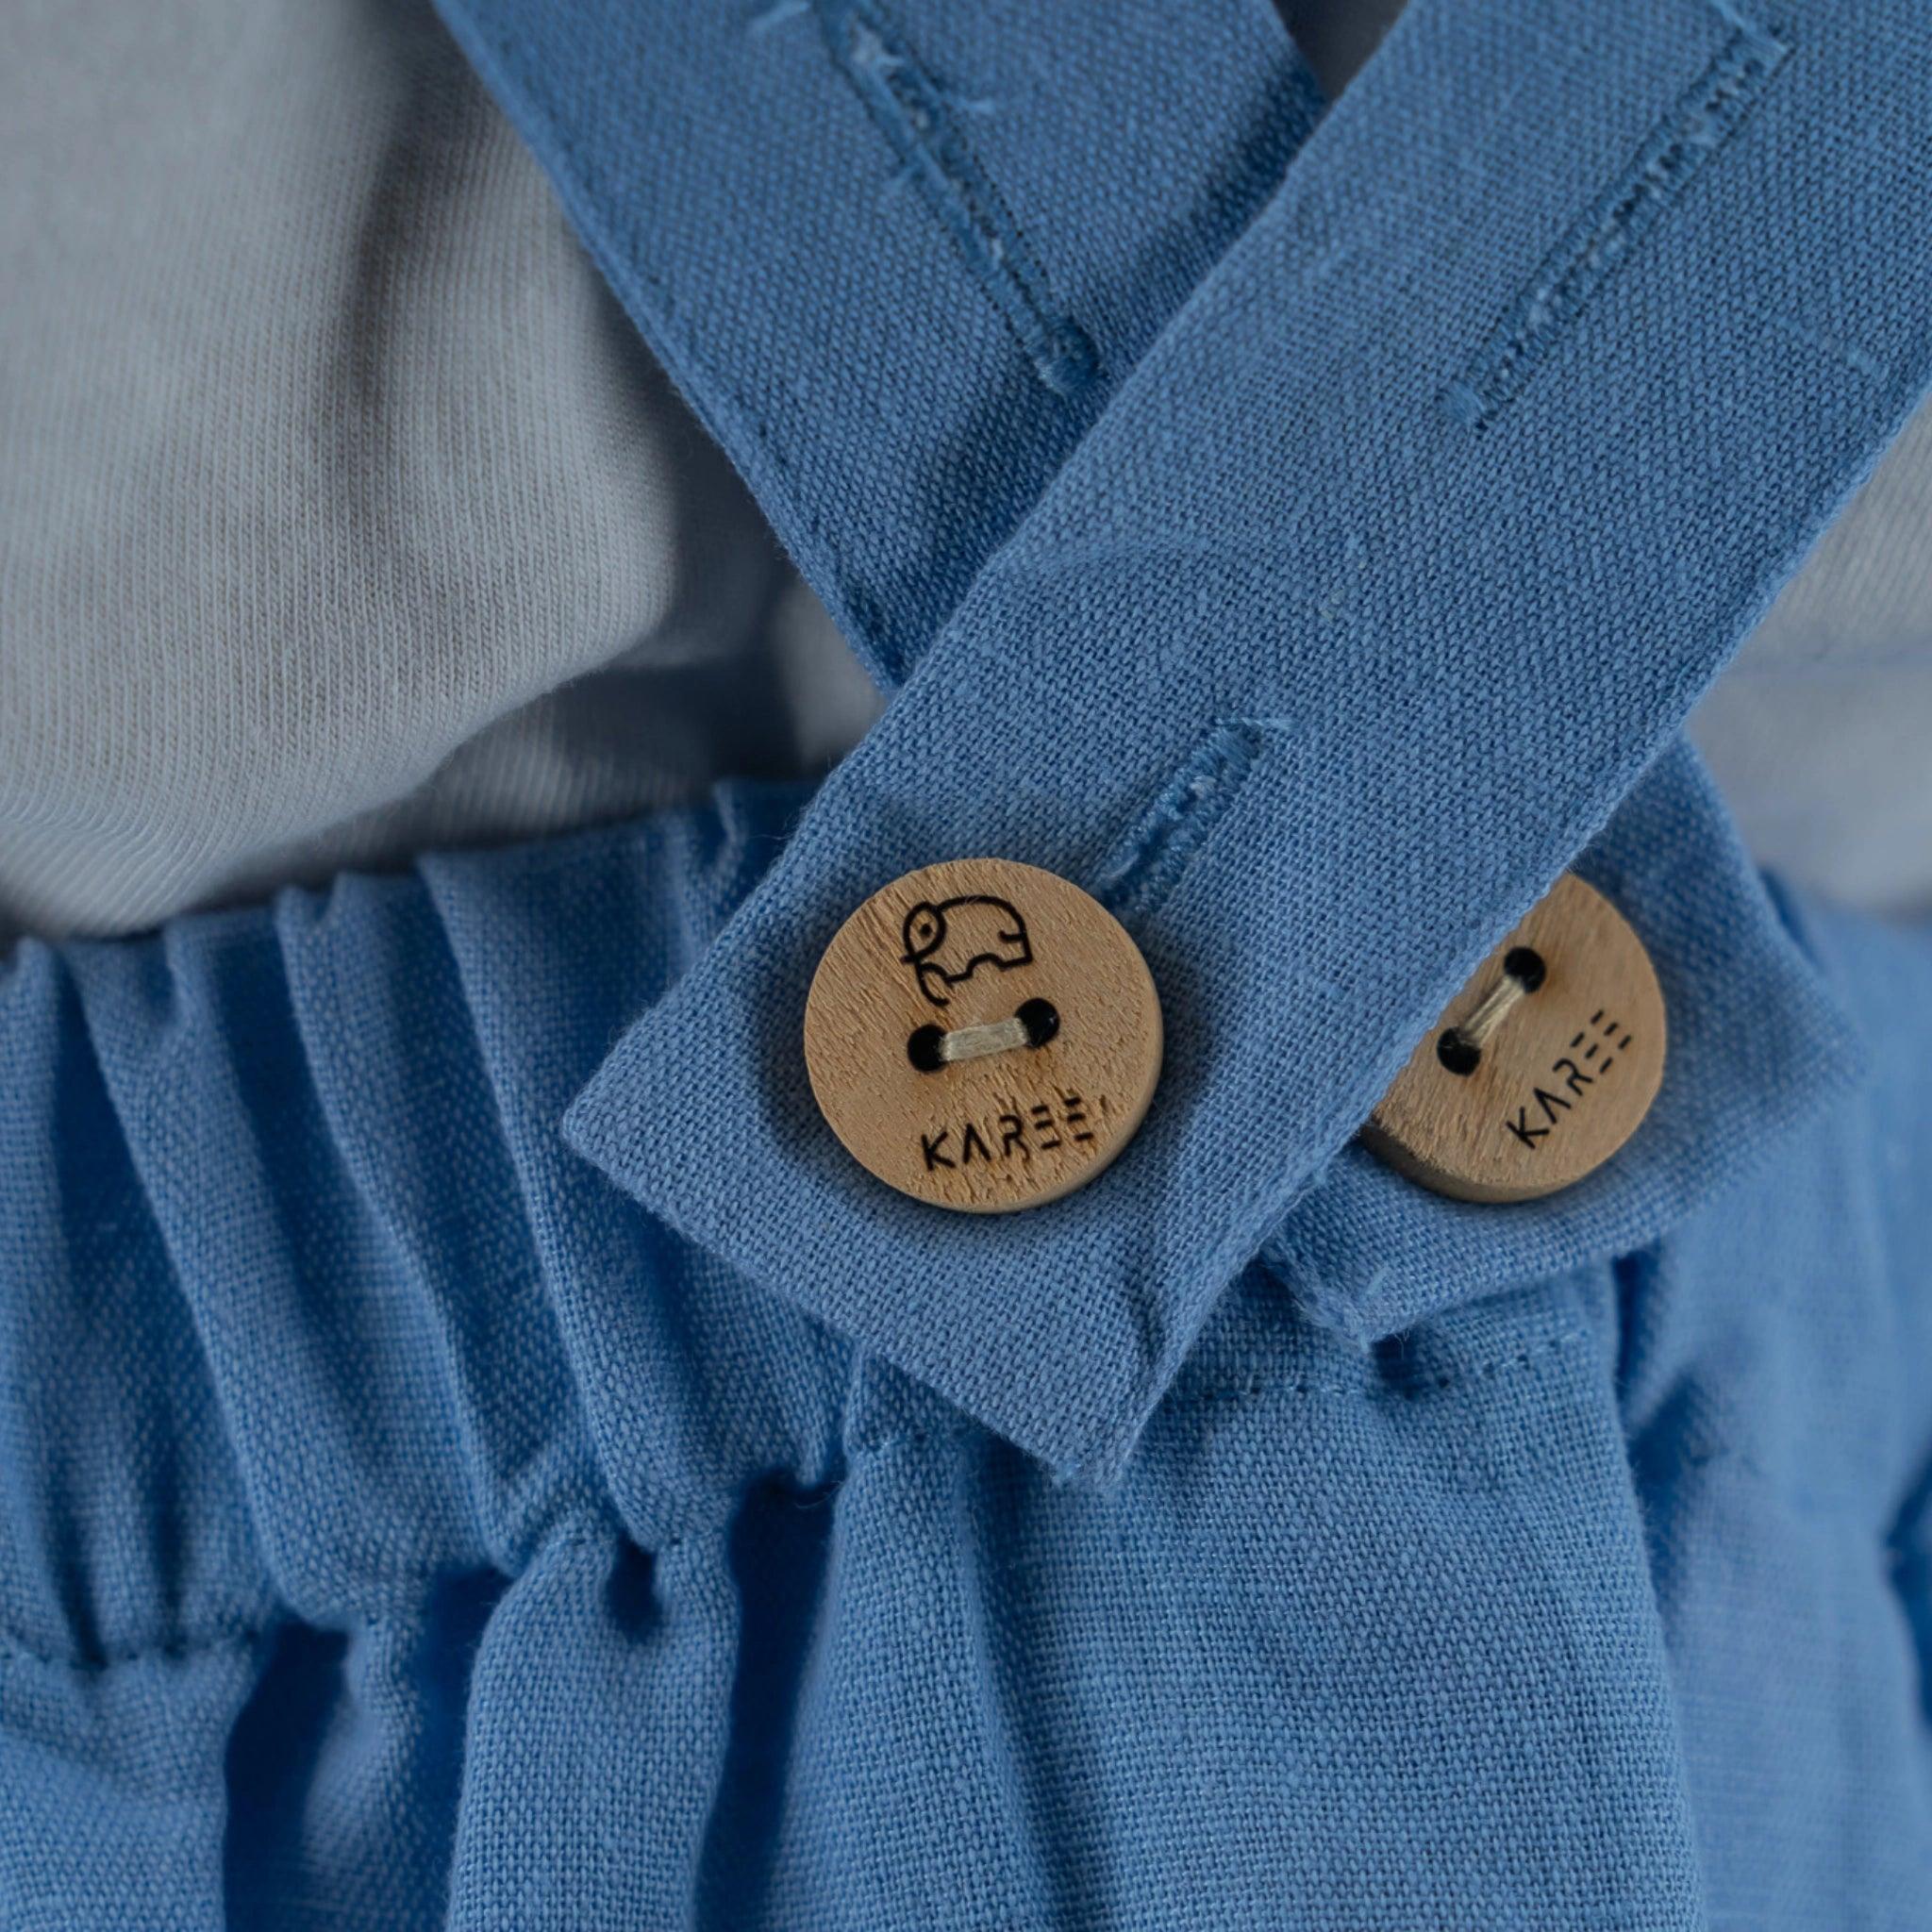 Close-up of a Karee Cerulean Blue Linen Pinafore with ruffled fabric and two wooden buttons.